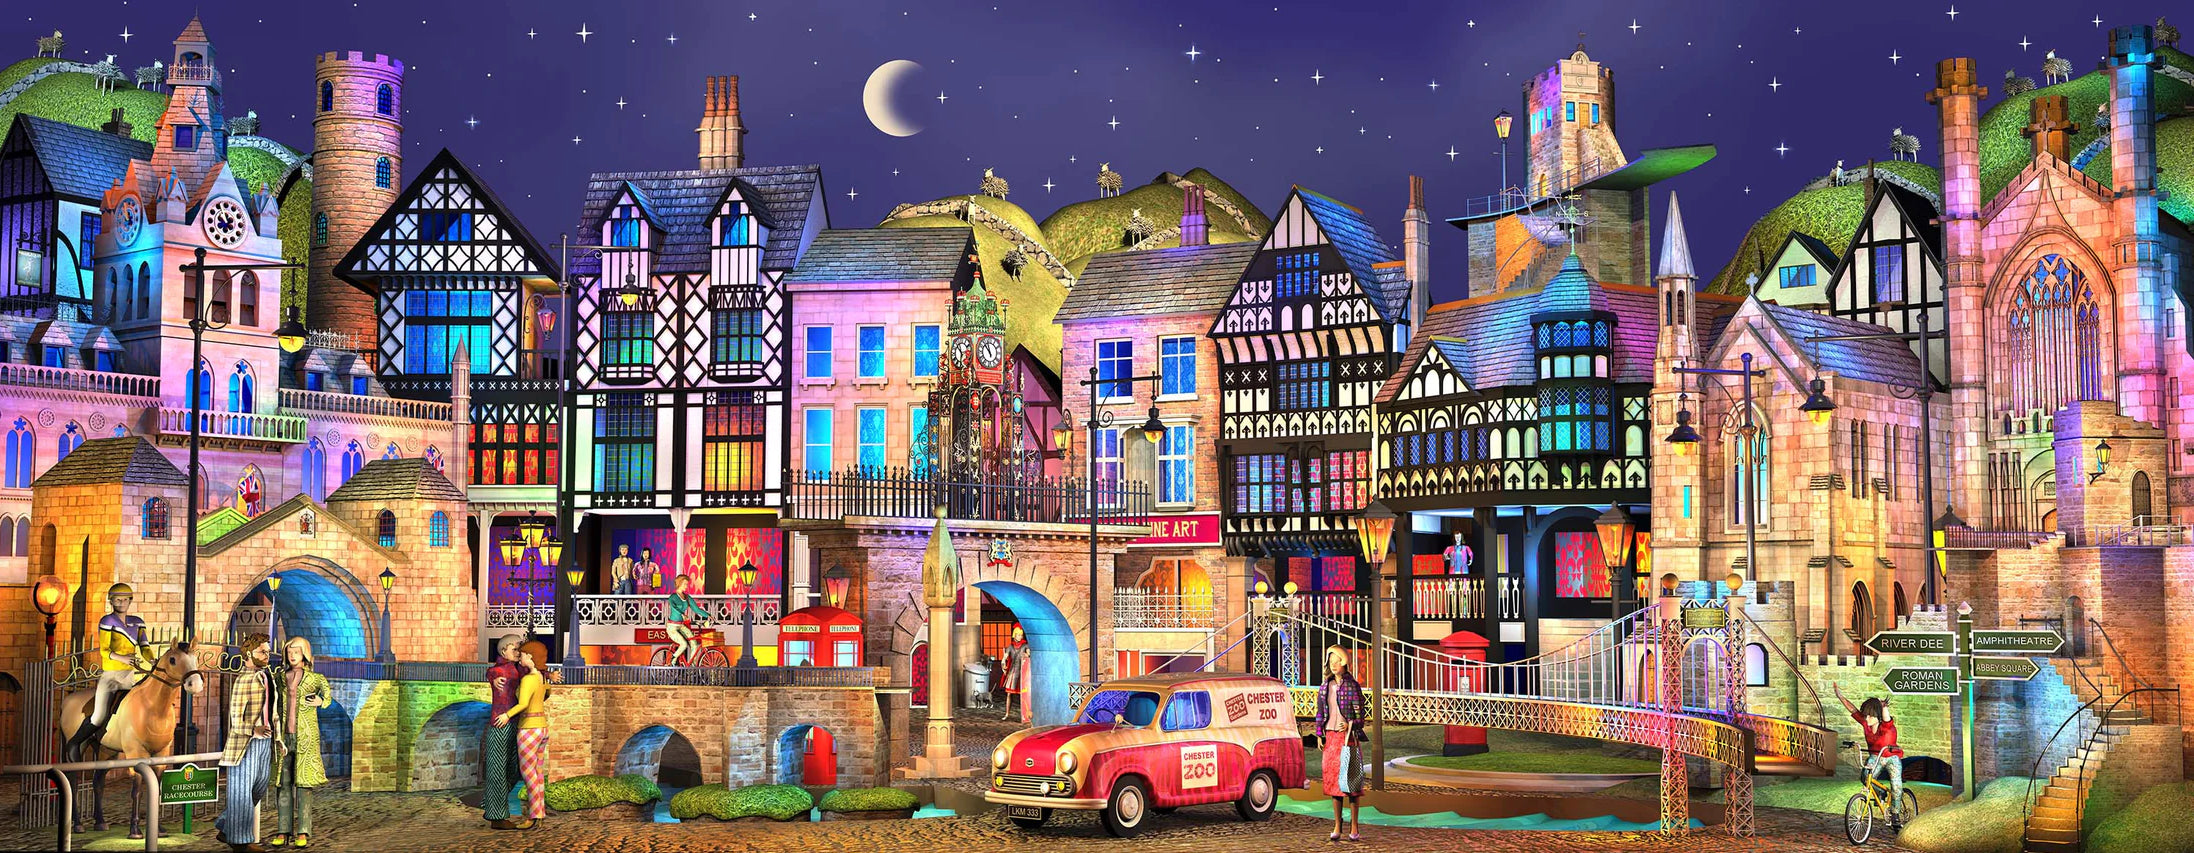 Keith Drury - 'Chester Way' - Limited Edition Artwork